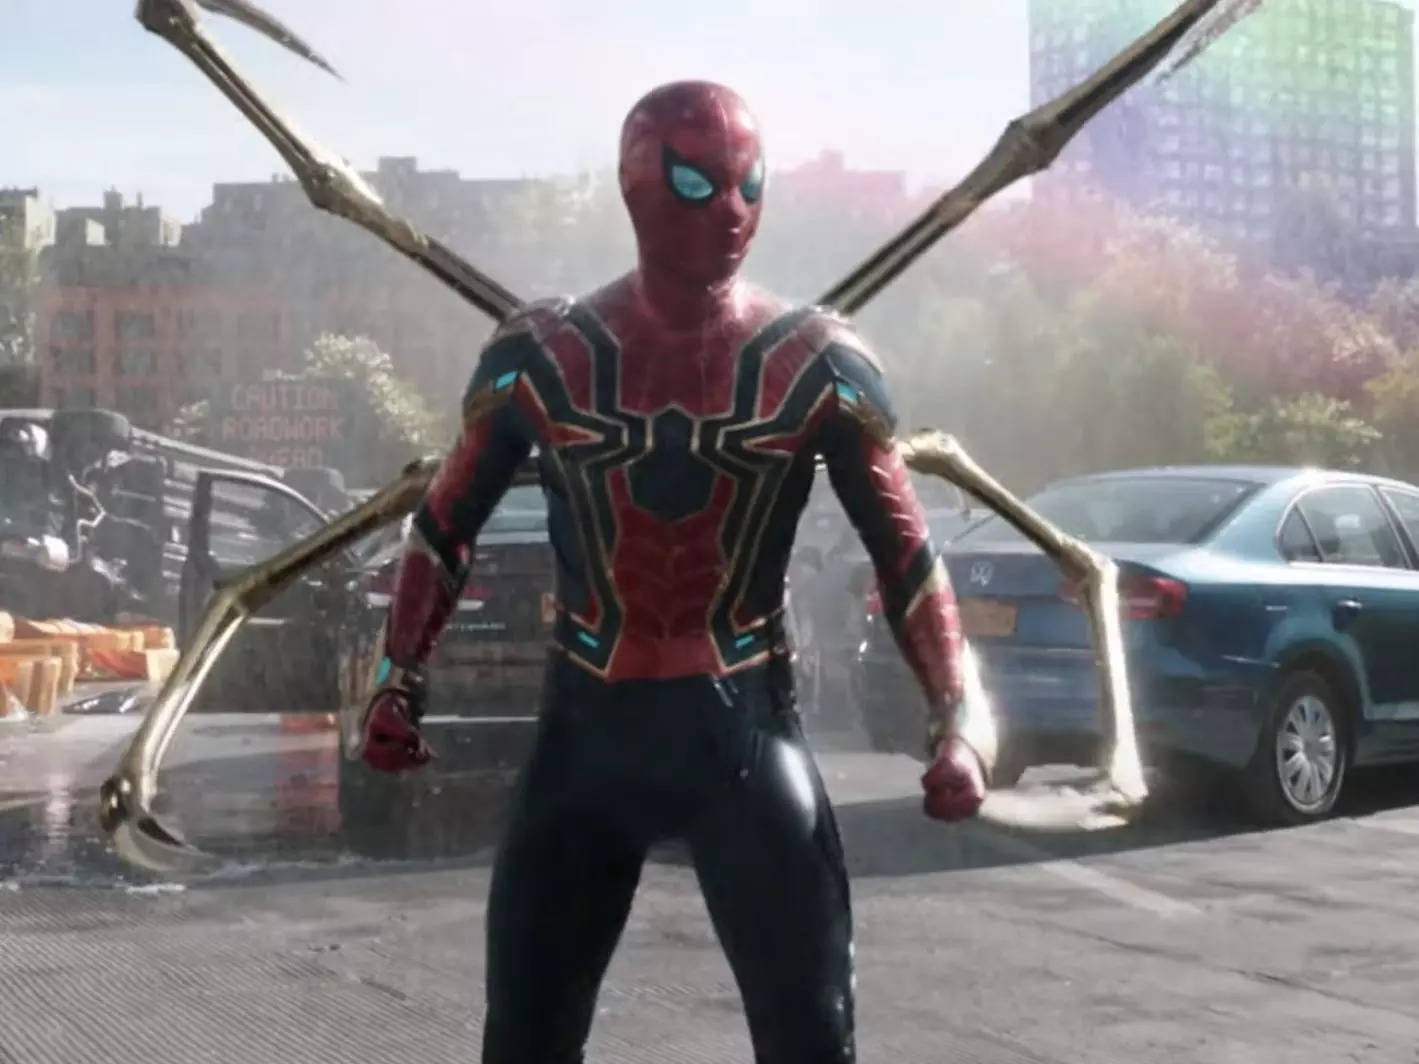 The 1st 'Spider-Man: No Way Home' trailer is finally here and it teases